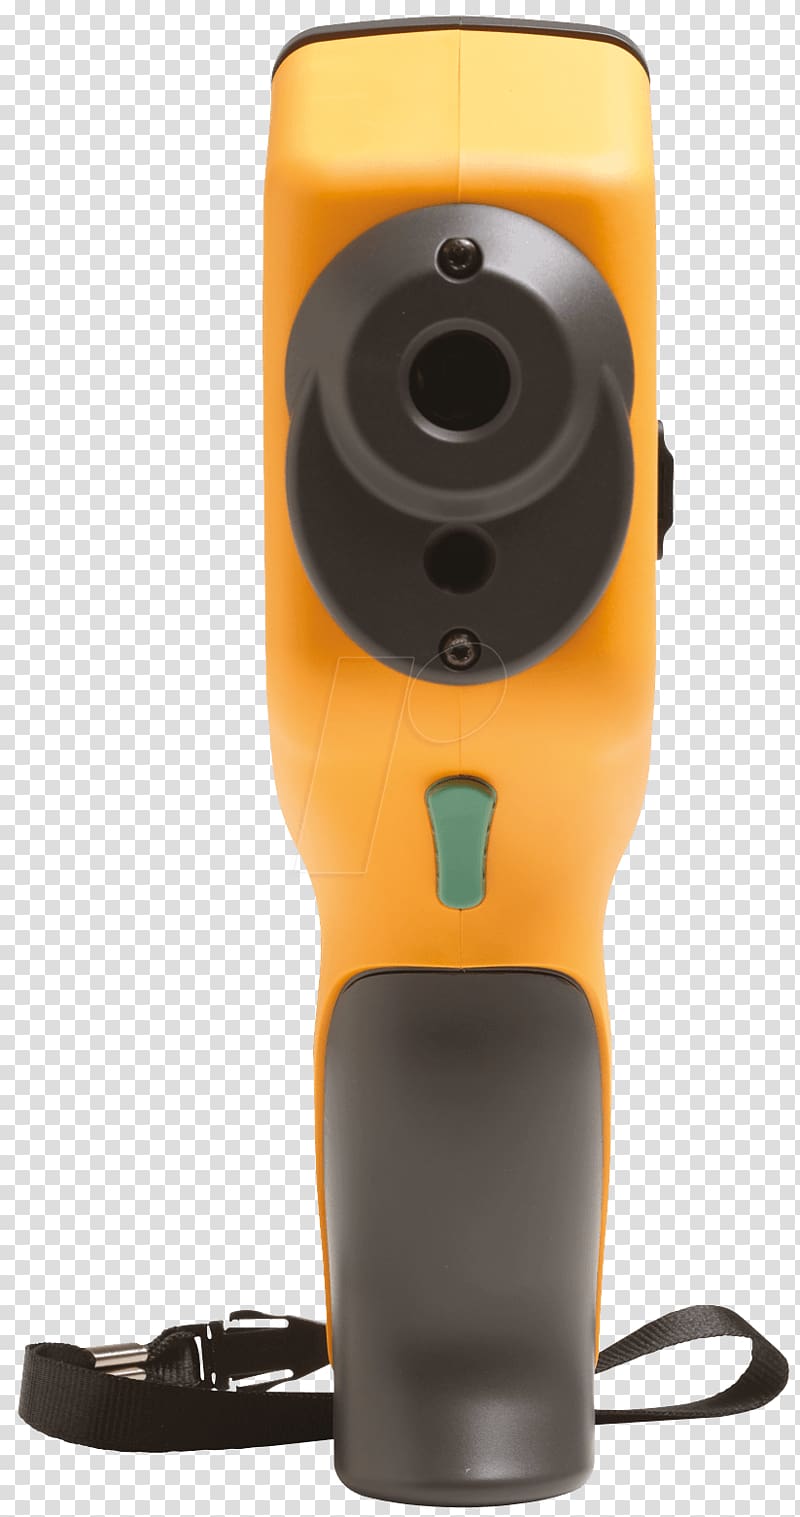 Fluke Corporation Infrared Thermometers Multimeter Measurement, Infrared Thermometers transparent background PNG clipart